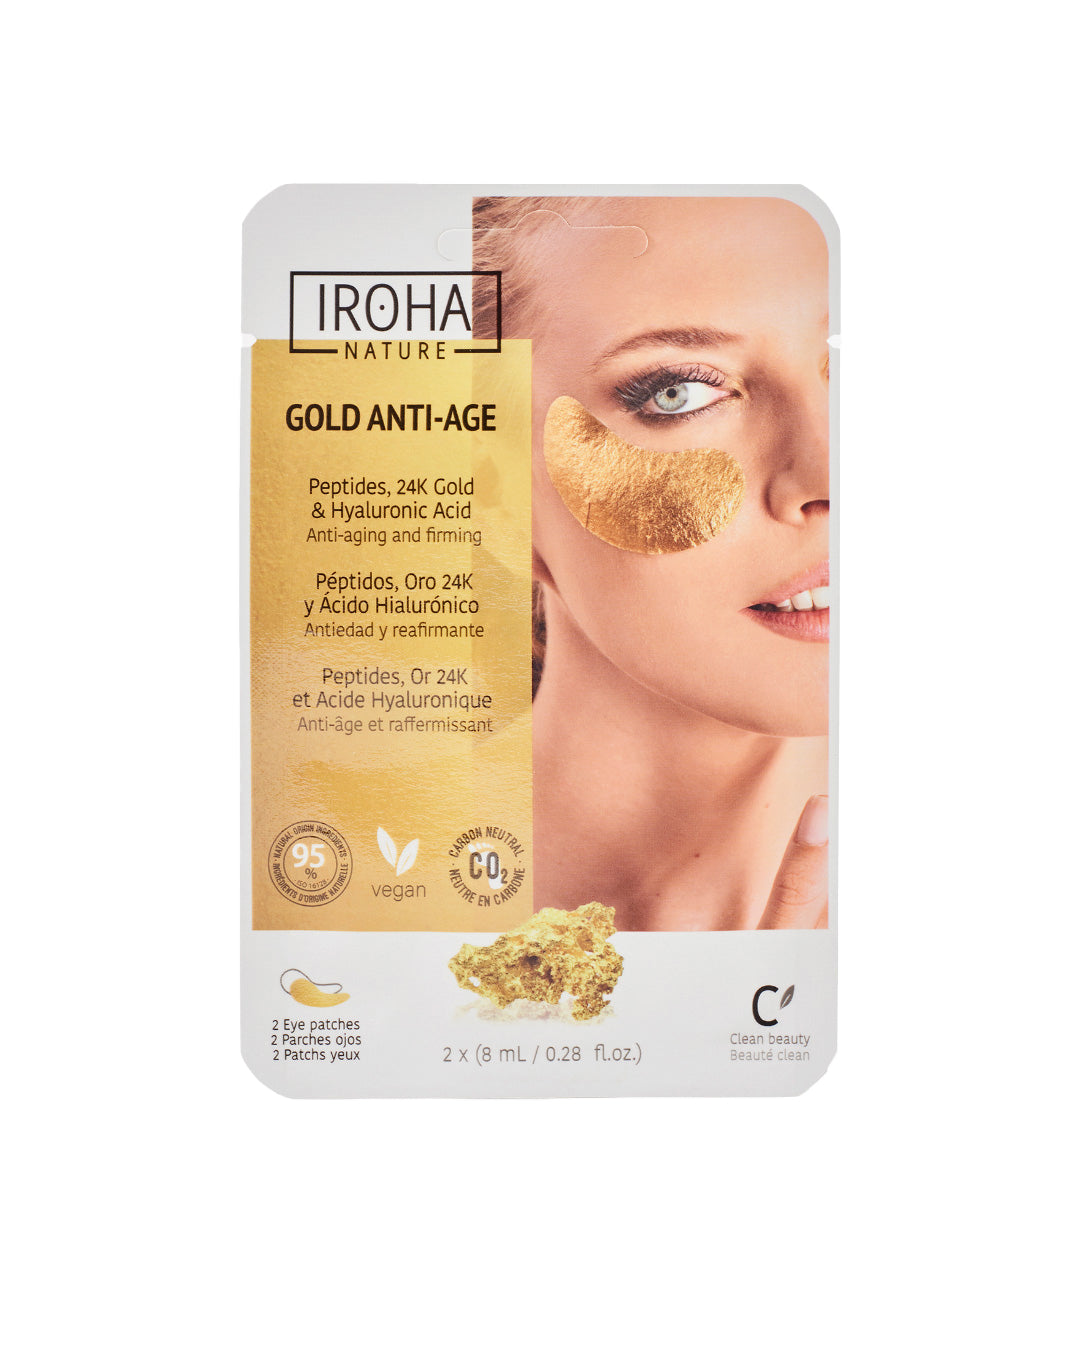 

Iroha Nature Anti-Aging Eye Contour Patch in Foil Technology with Peptides, 24K Gold, and Hyaluronic Acid 2 pcs x 8 ml